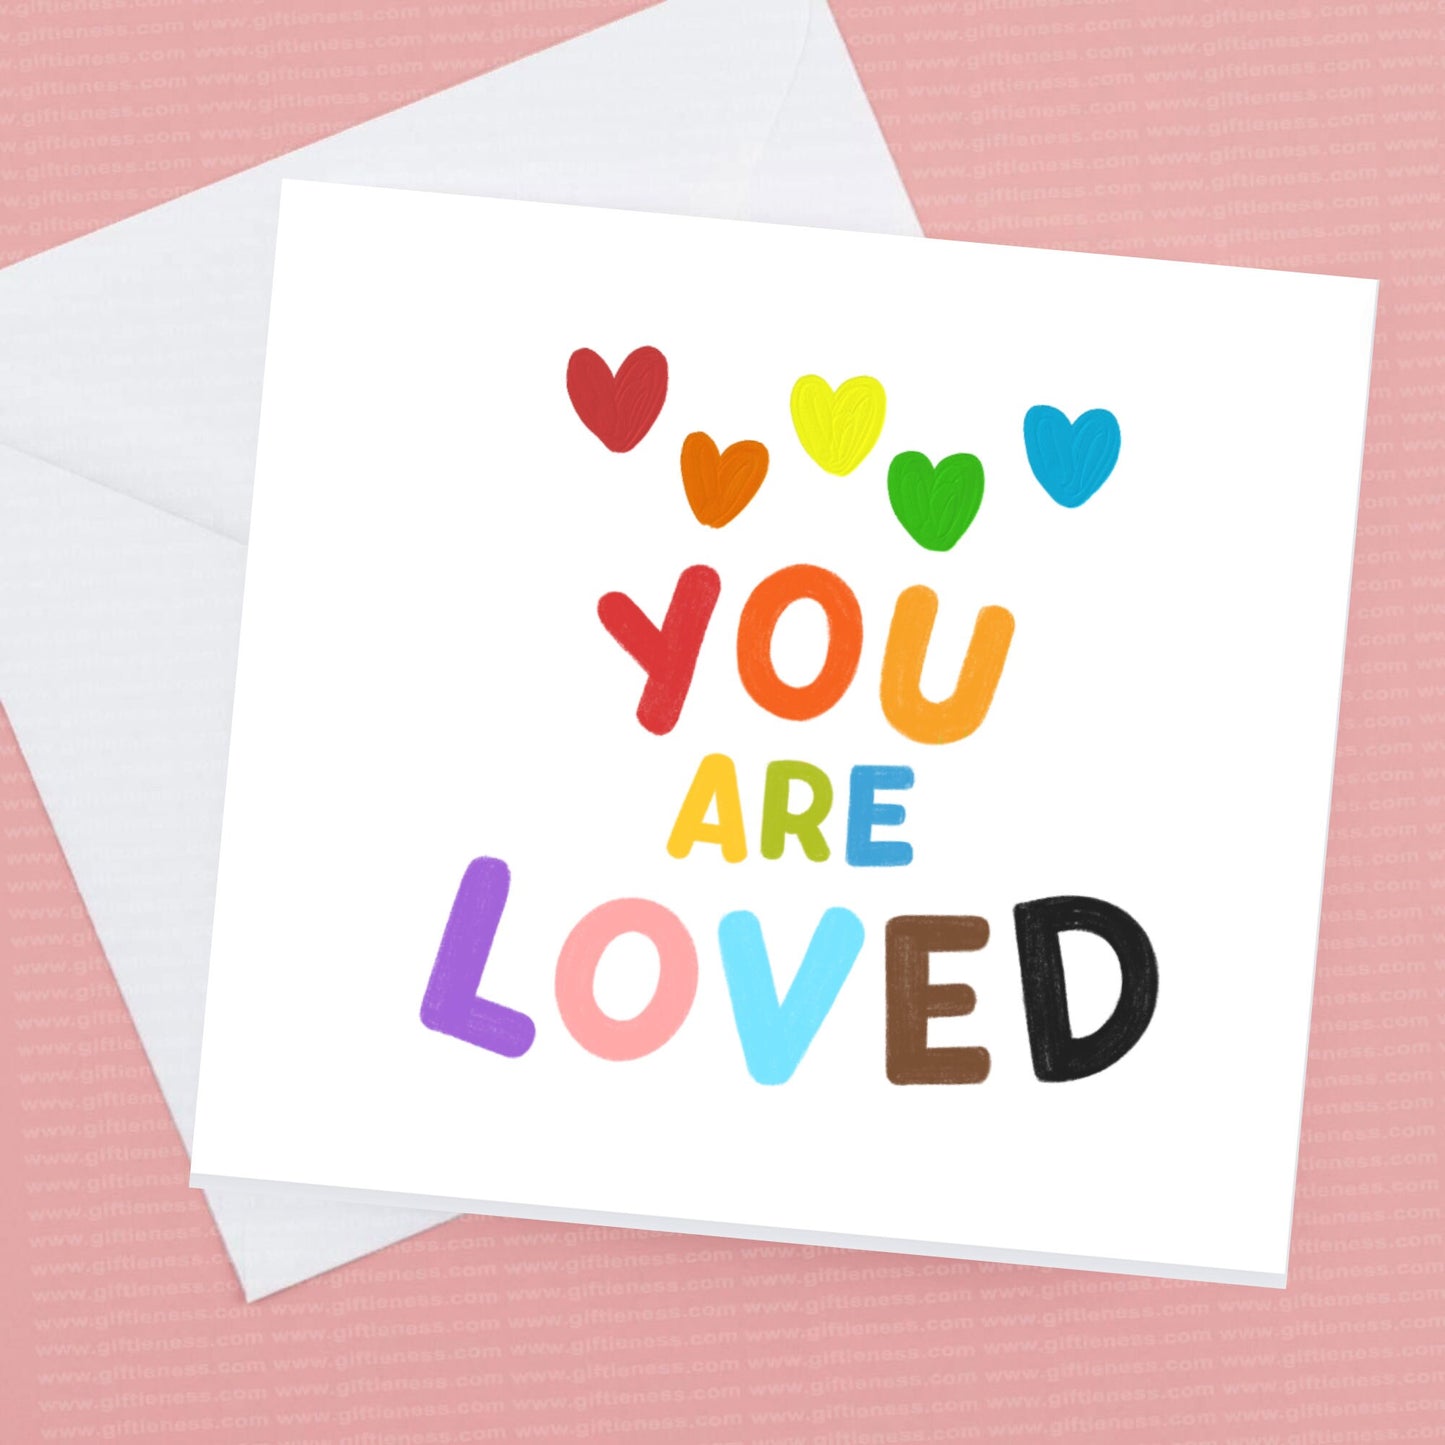 You Are Loved card and envelope